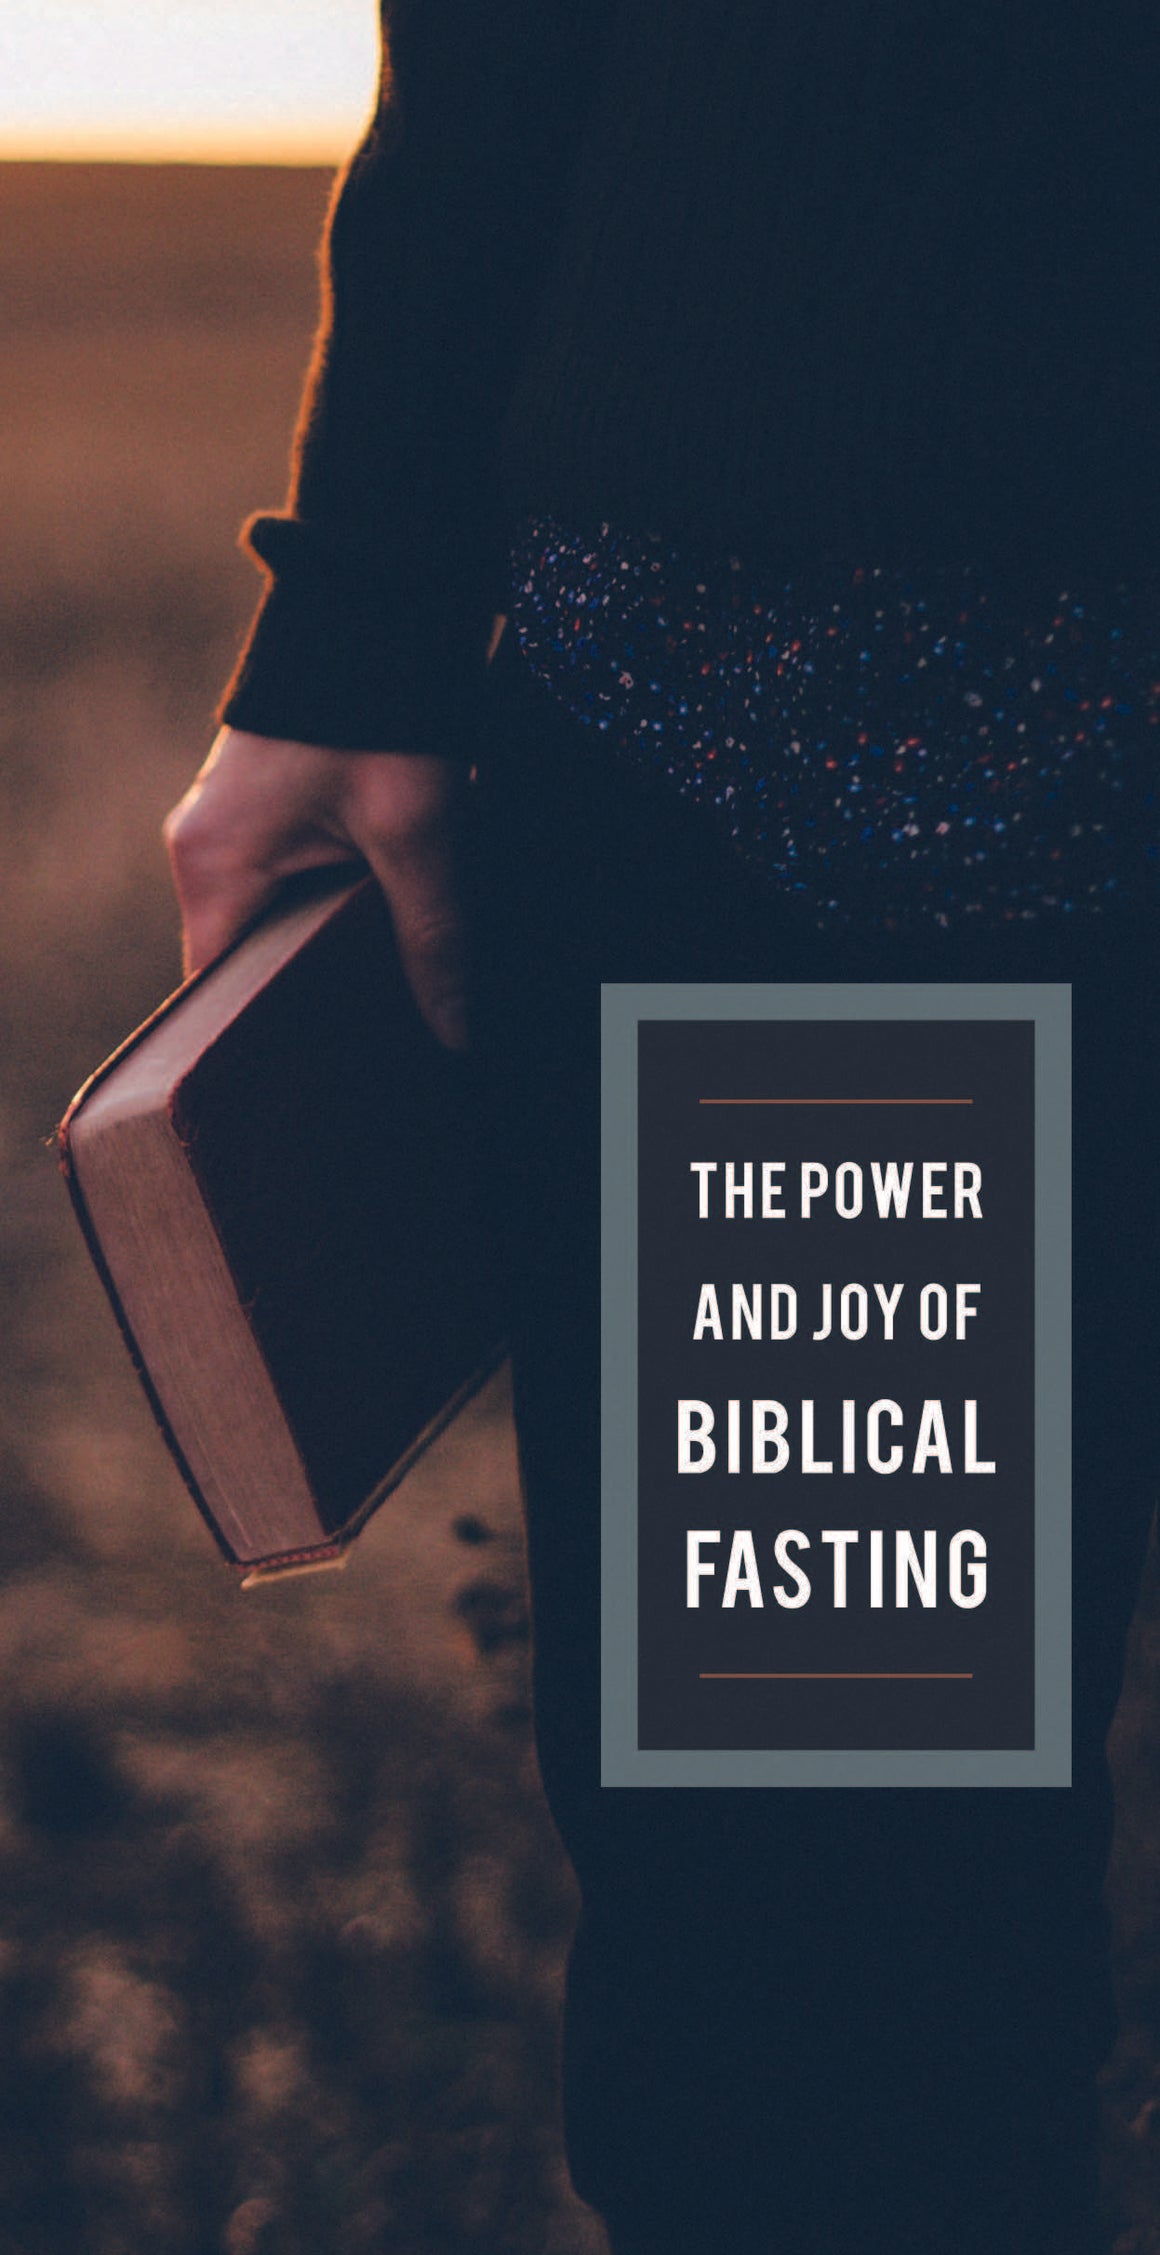 The Power and Joy of Biblical Fasting